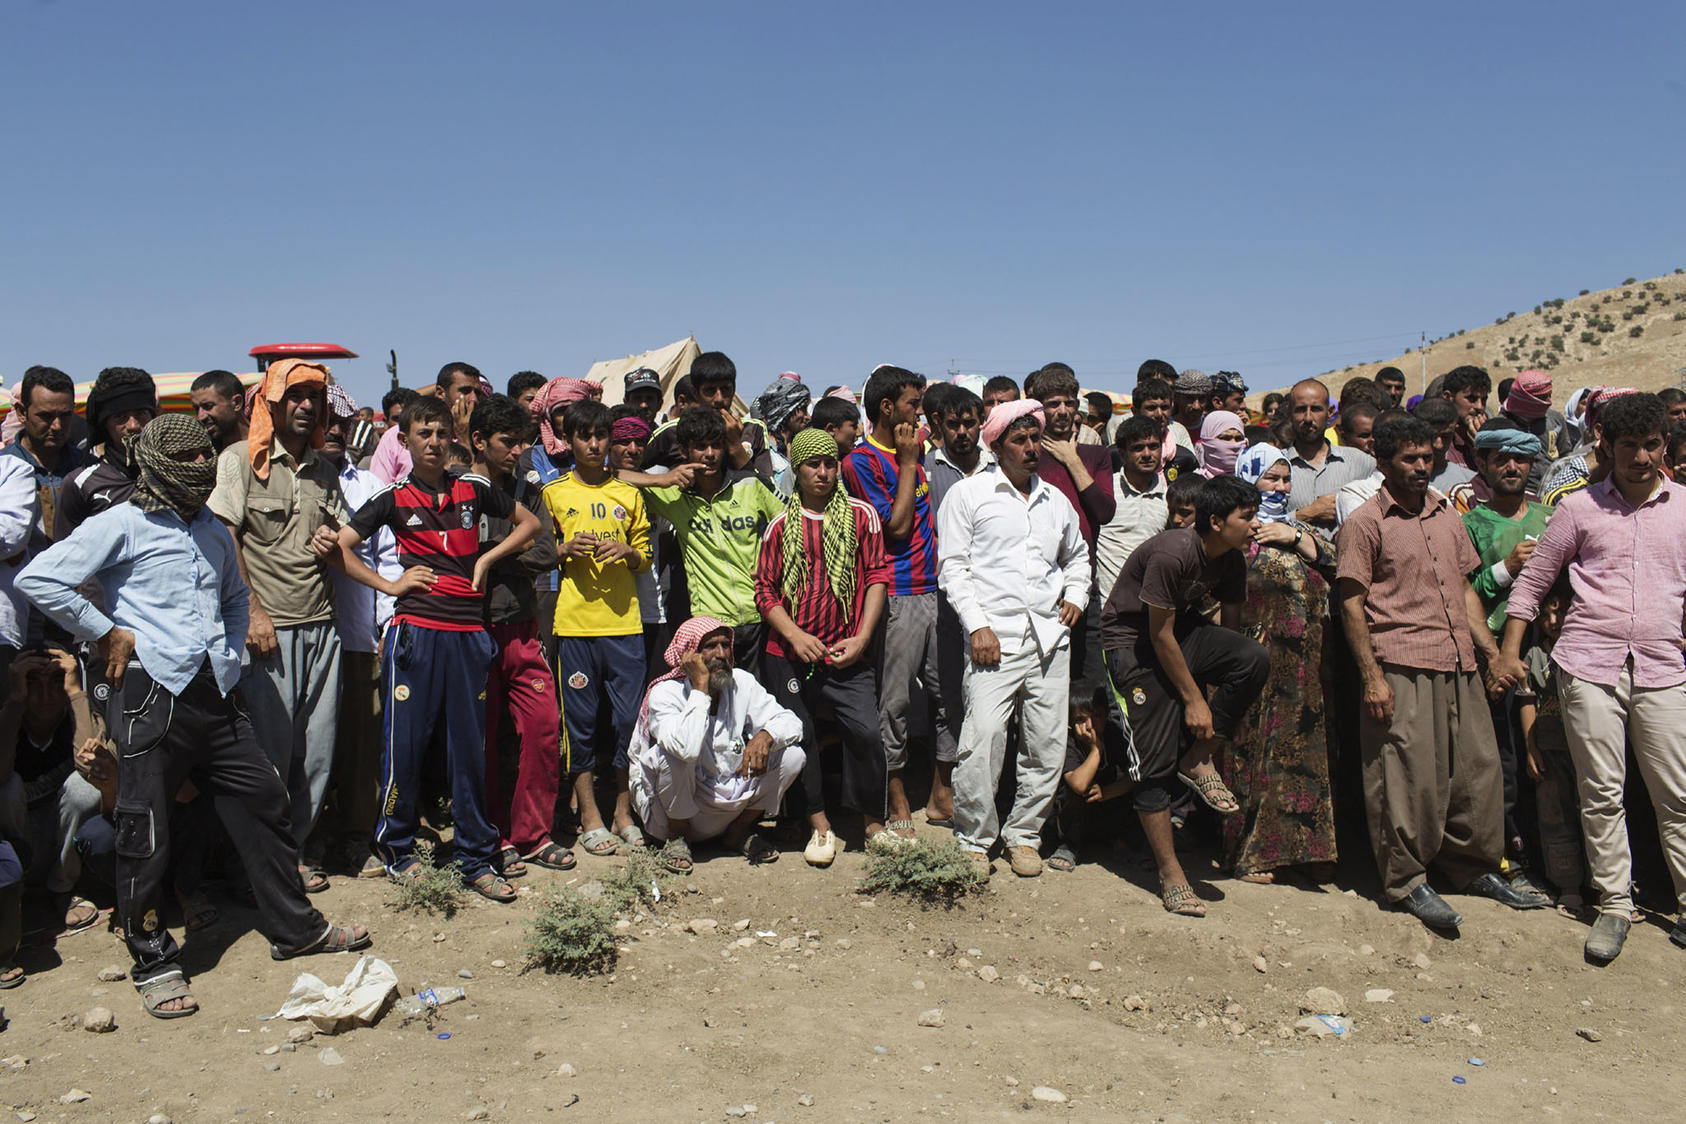 Iraqi Yazidi people wait to receive aid at a makeshift roadside camp near the border crossing in Feshkhabour, Dohuk Province, northern Iraq, Aug. 11, 2014.